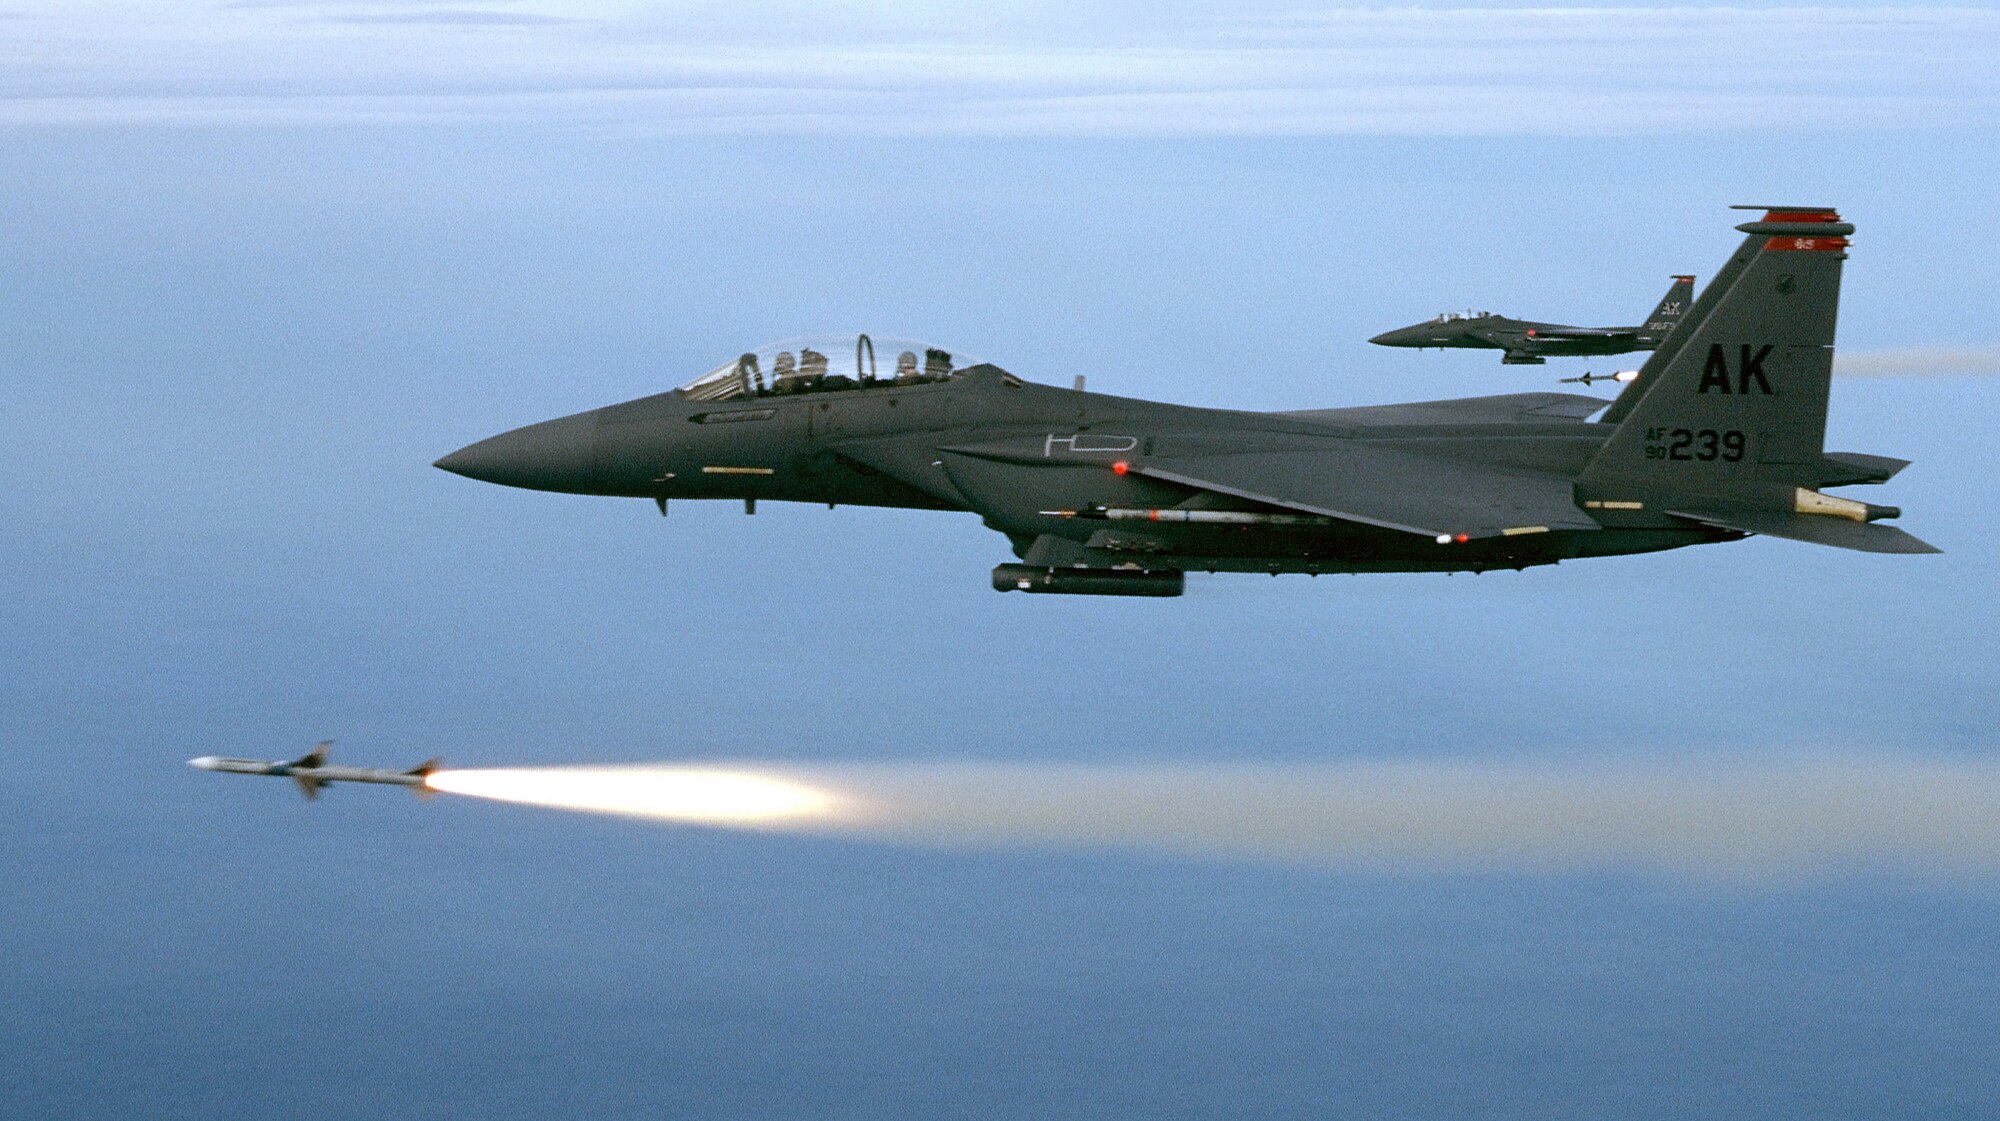 OVER THE GULF OF MEXICO -- Two F-15E from the 90th Fighter Squadron, Elmendorf Air Force Base, Alaska, fire a pair of AIM-7Ms during a training mission. The mission took place over the Gulf of Mexico just off the coast of Florida. (U.S. Air Force photo)